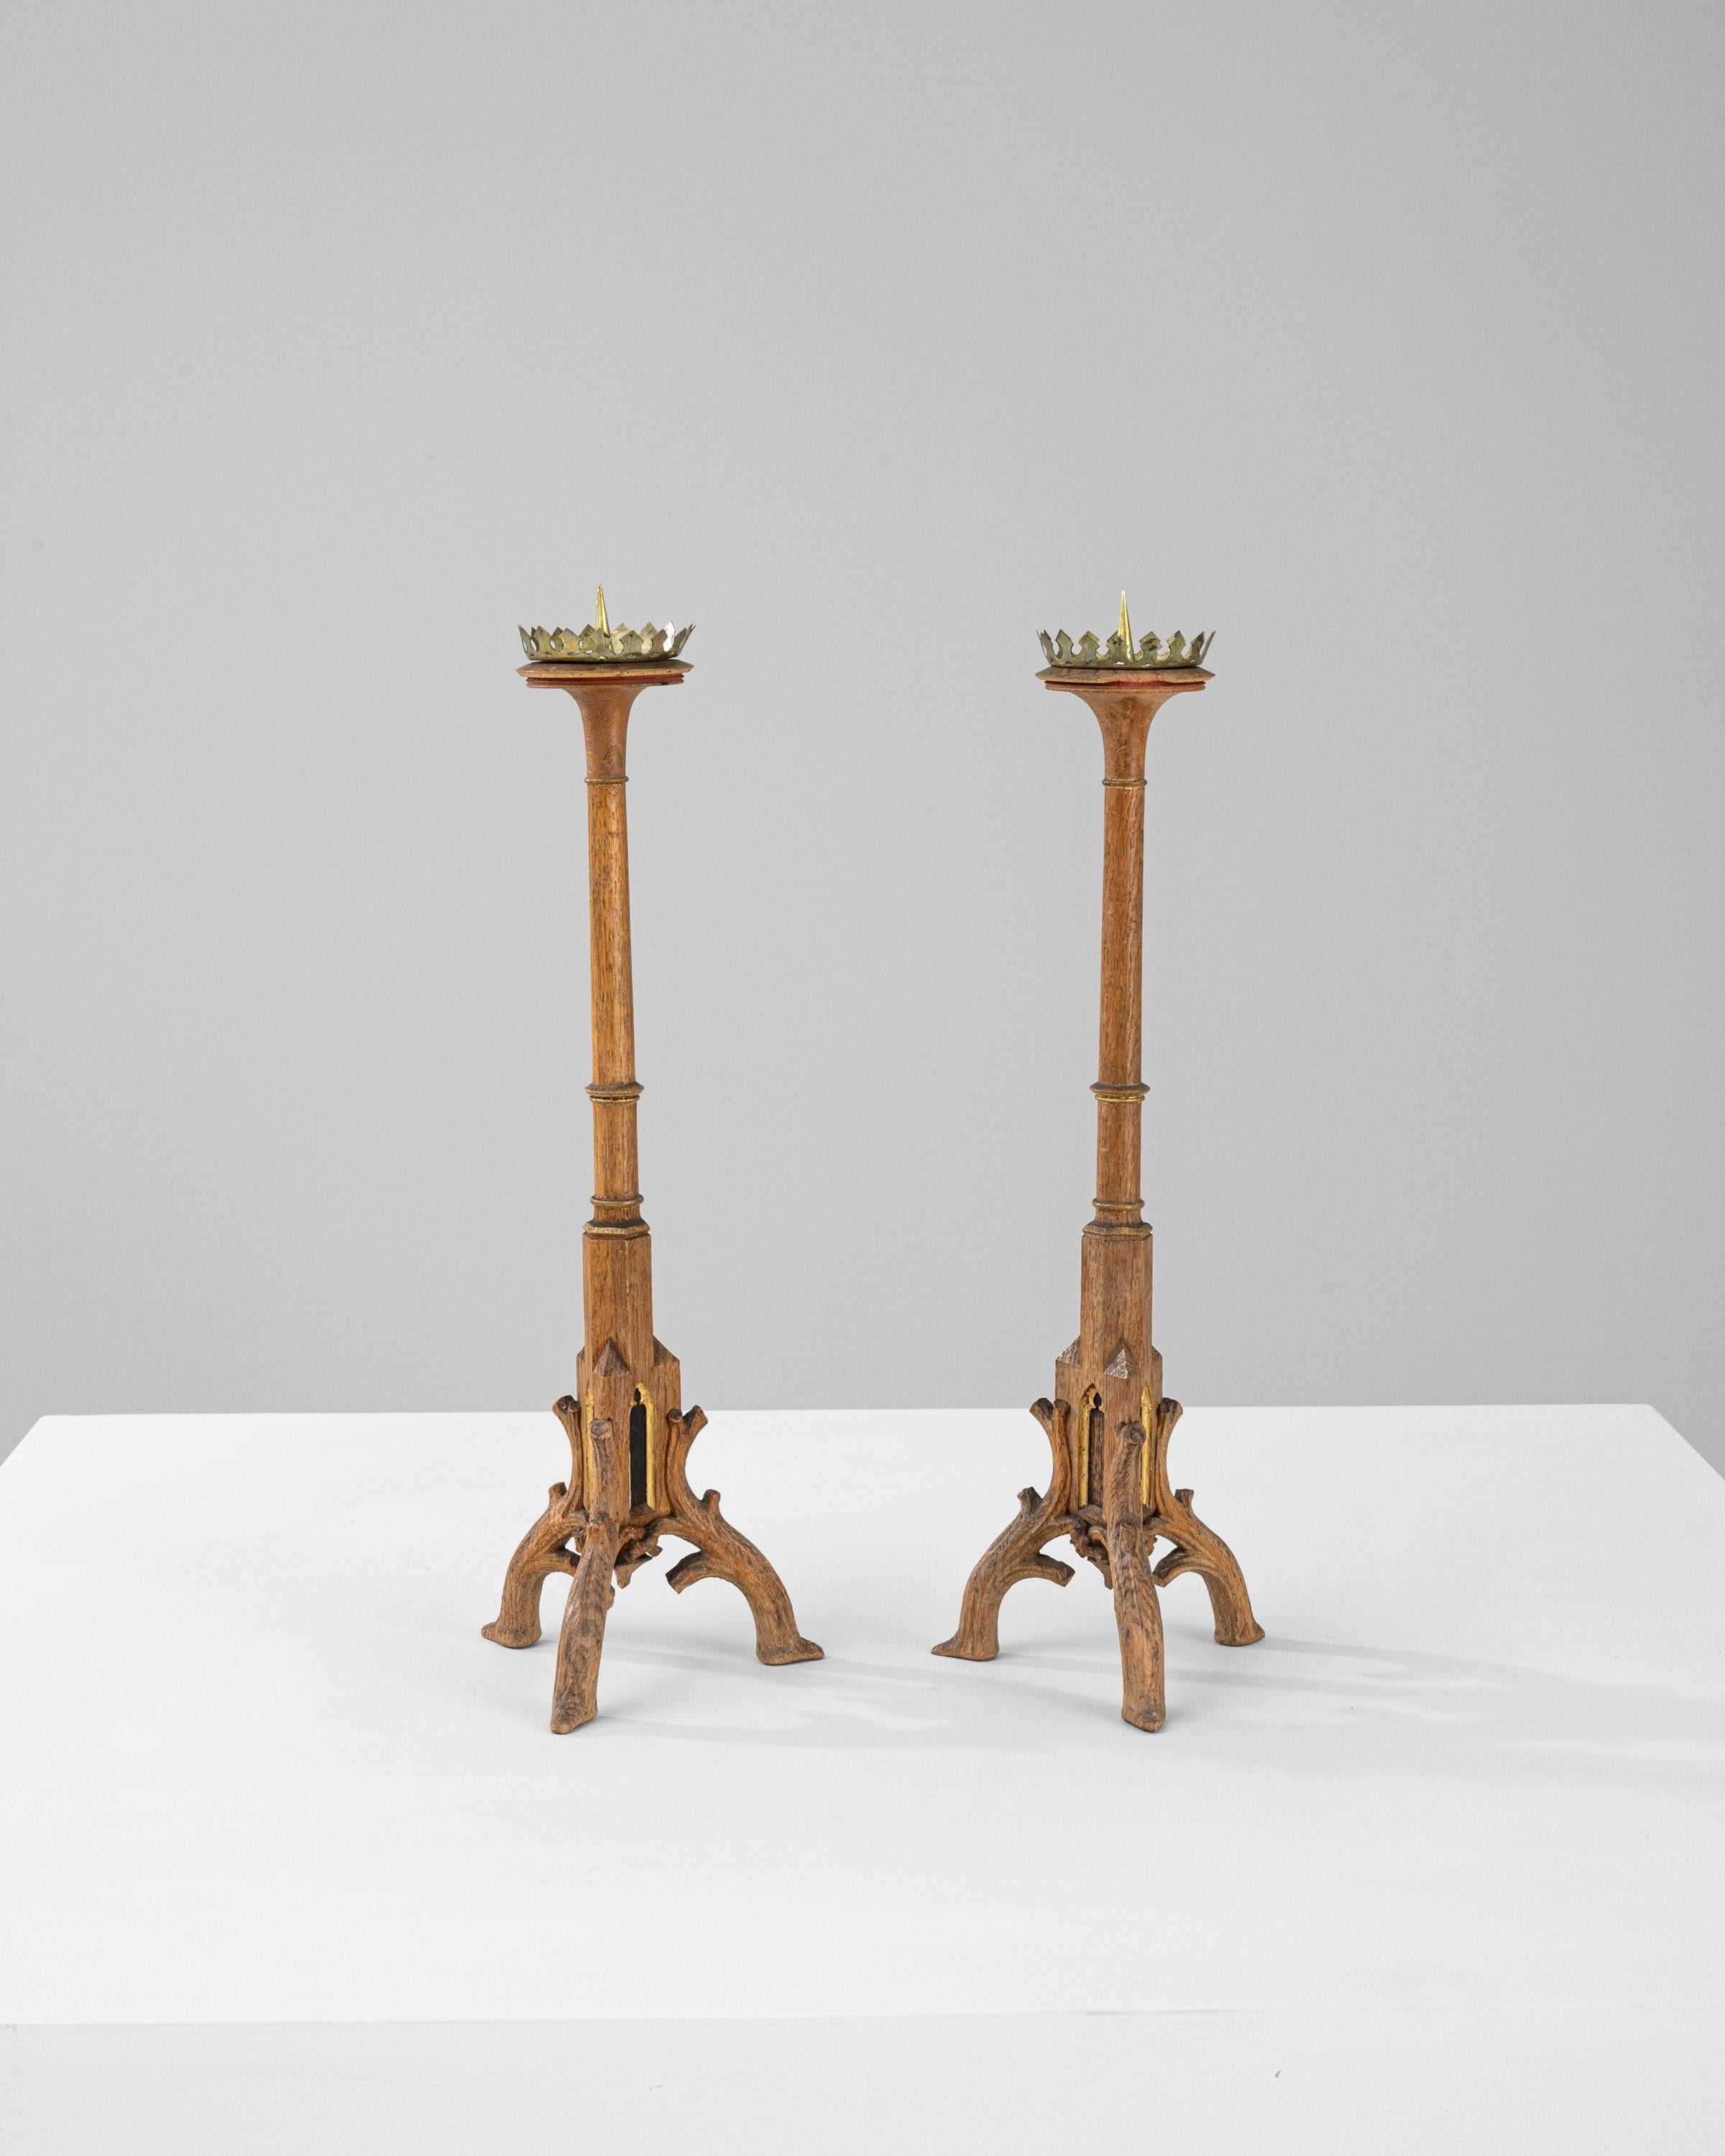 These 19th Century French Wooden Candlesticks exude a timeless grace, making them a splendid addition to any décor that appreciates antique charm. Each candlestick stands tall on an intricately carved wooden base, showcasing exquisite craftsmanship